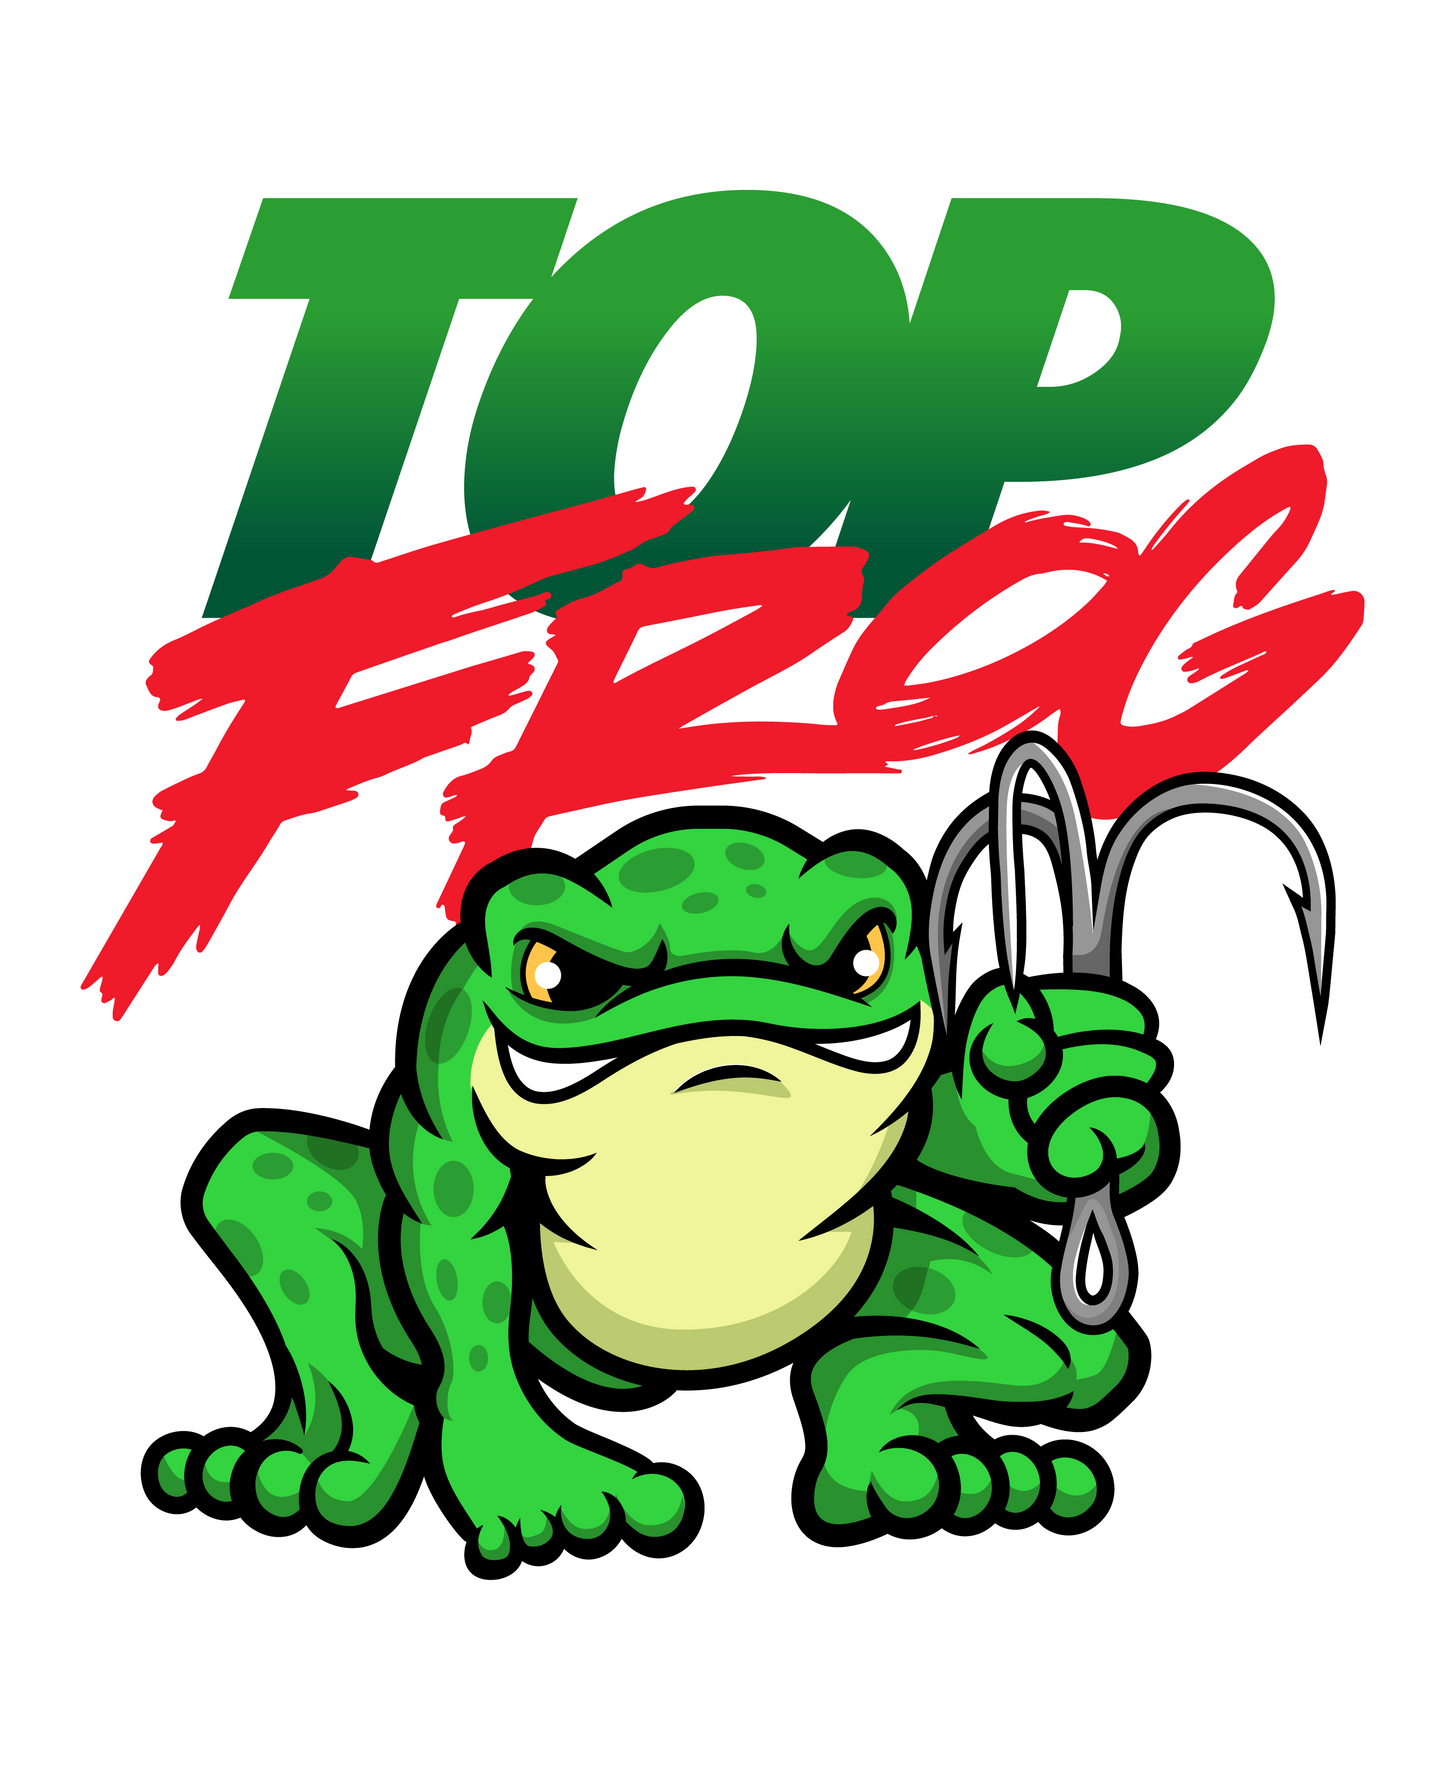 Top Frog magnet and sticker pack